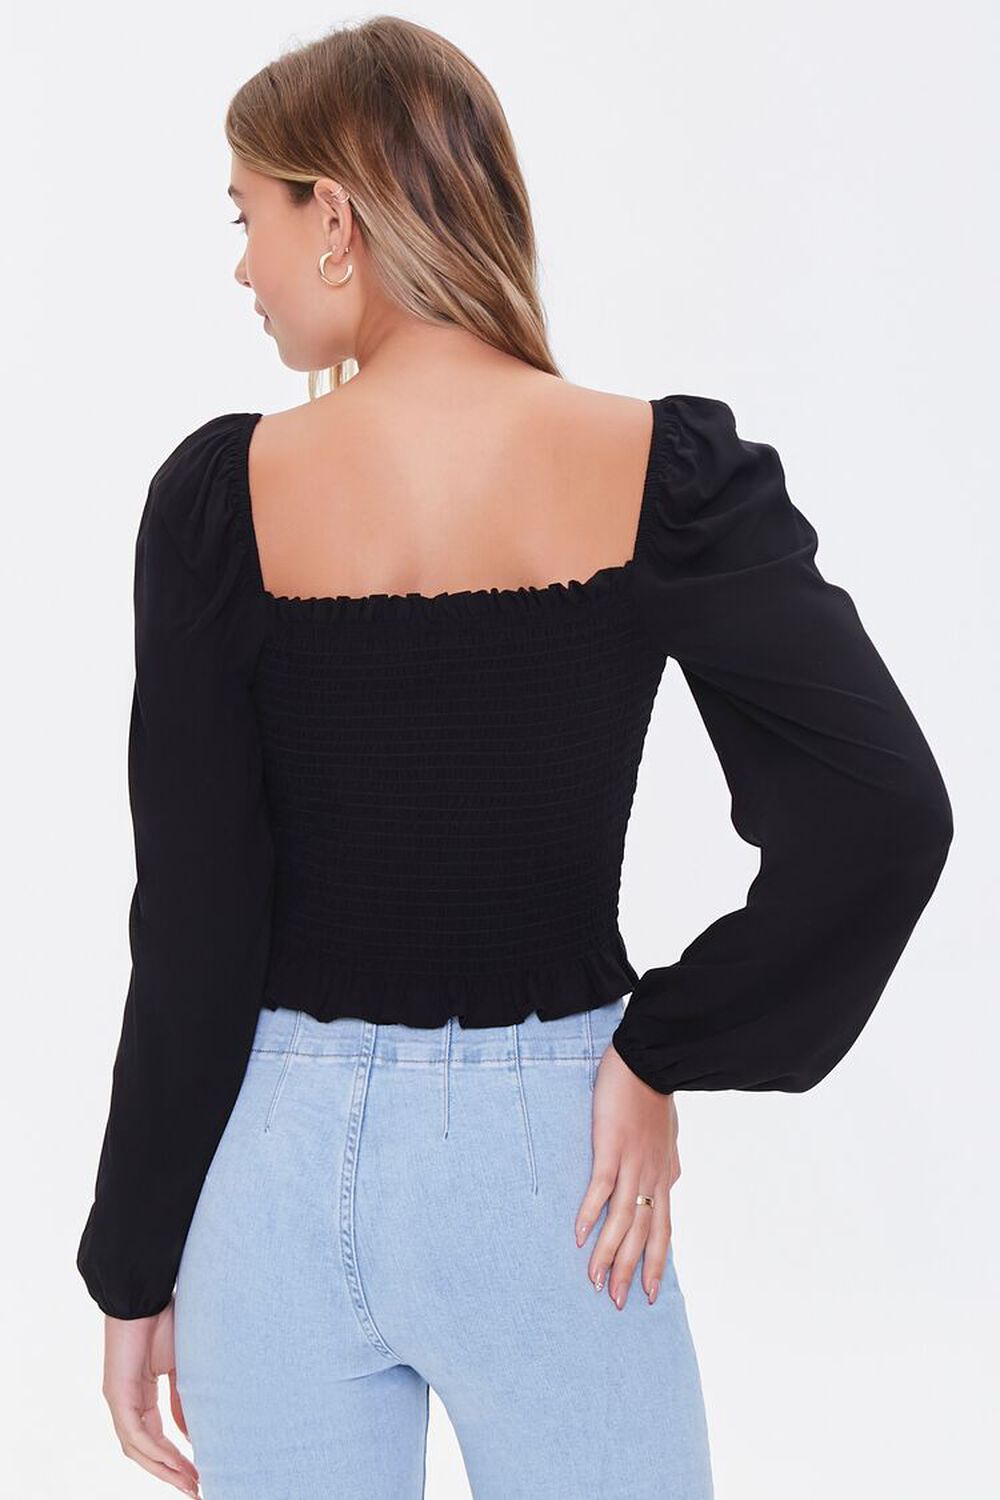 BLACK Smocked Lace-Up Top, image 3